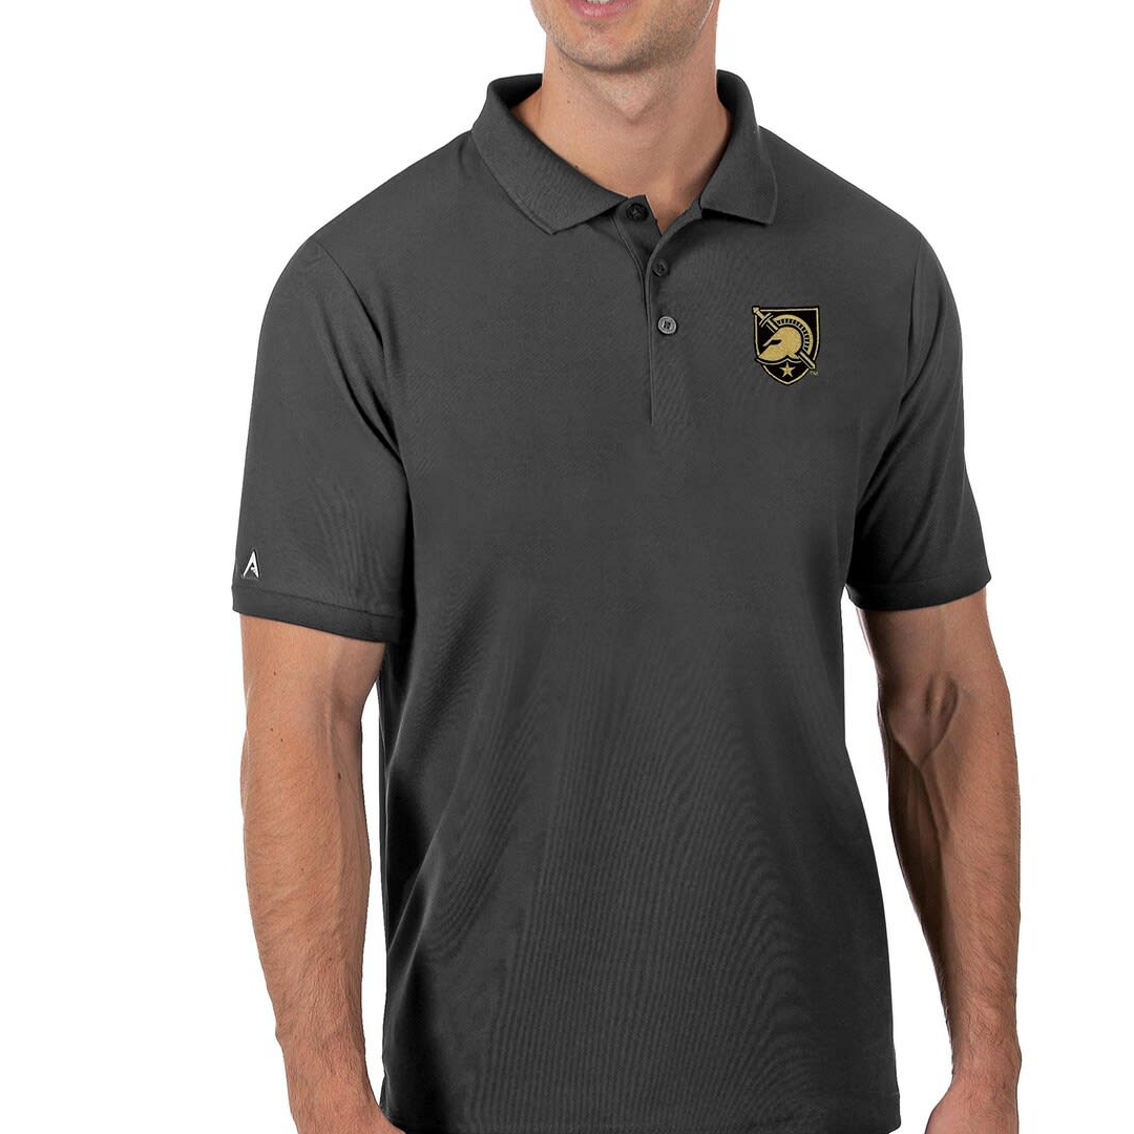 Antigua Men's Anthracite Army Black Knights Legacy Pique Polo - Image 2 of 2